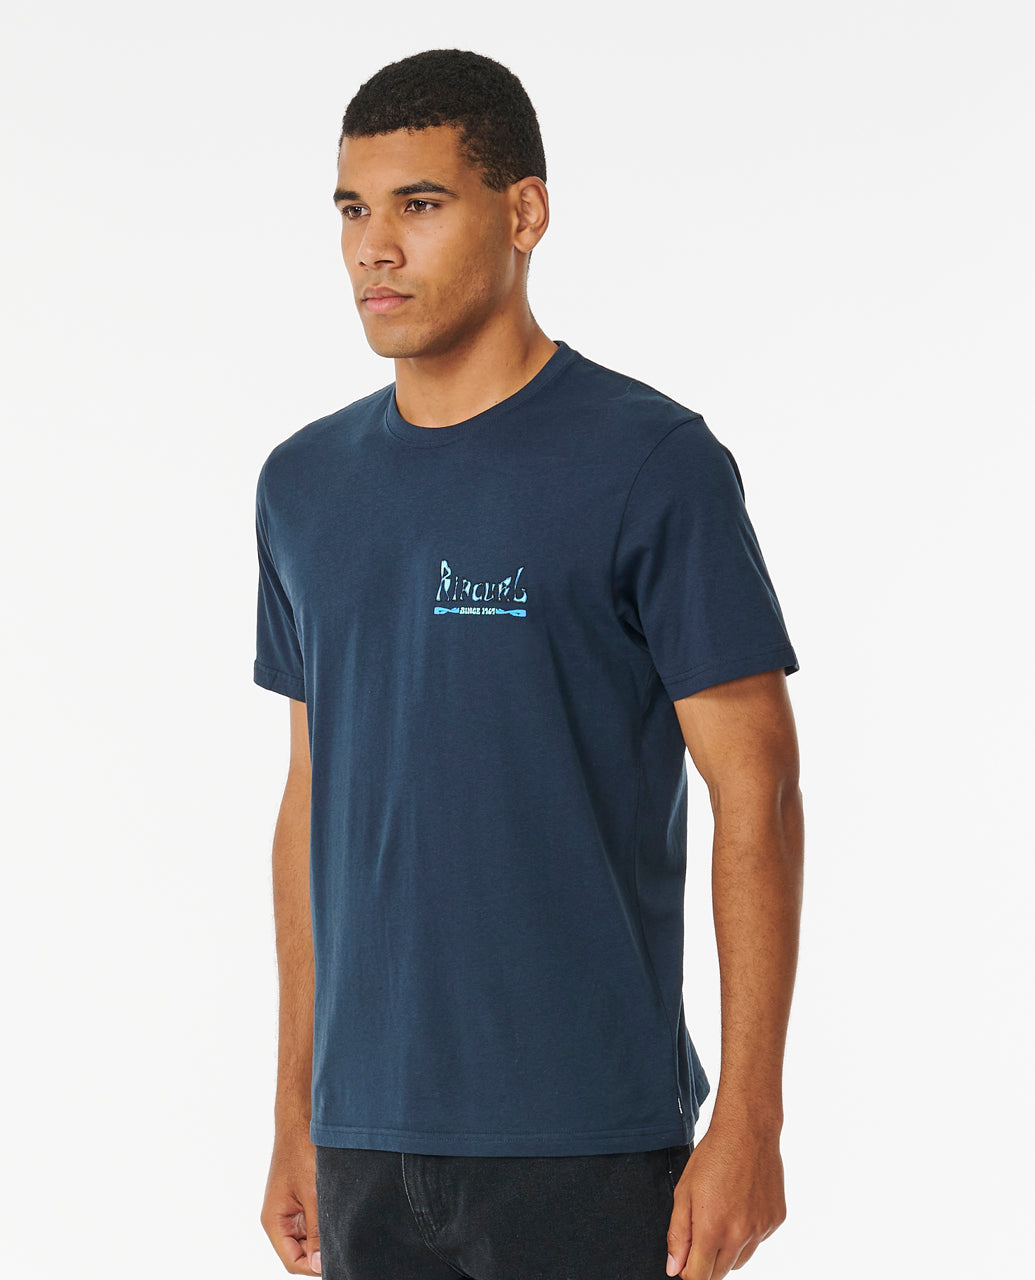 [ONLINE EXCLUSIVE] Rip Curl Men Rayzed And Hazed Tee 0D6MTE